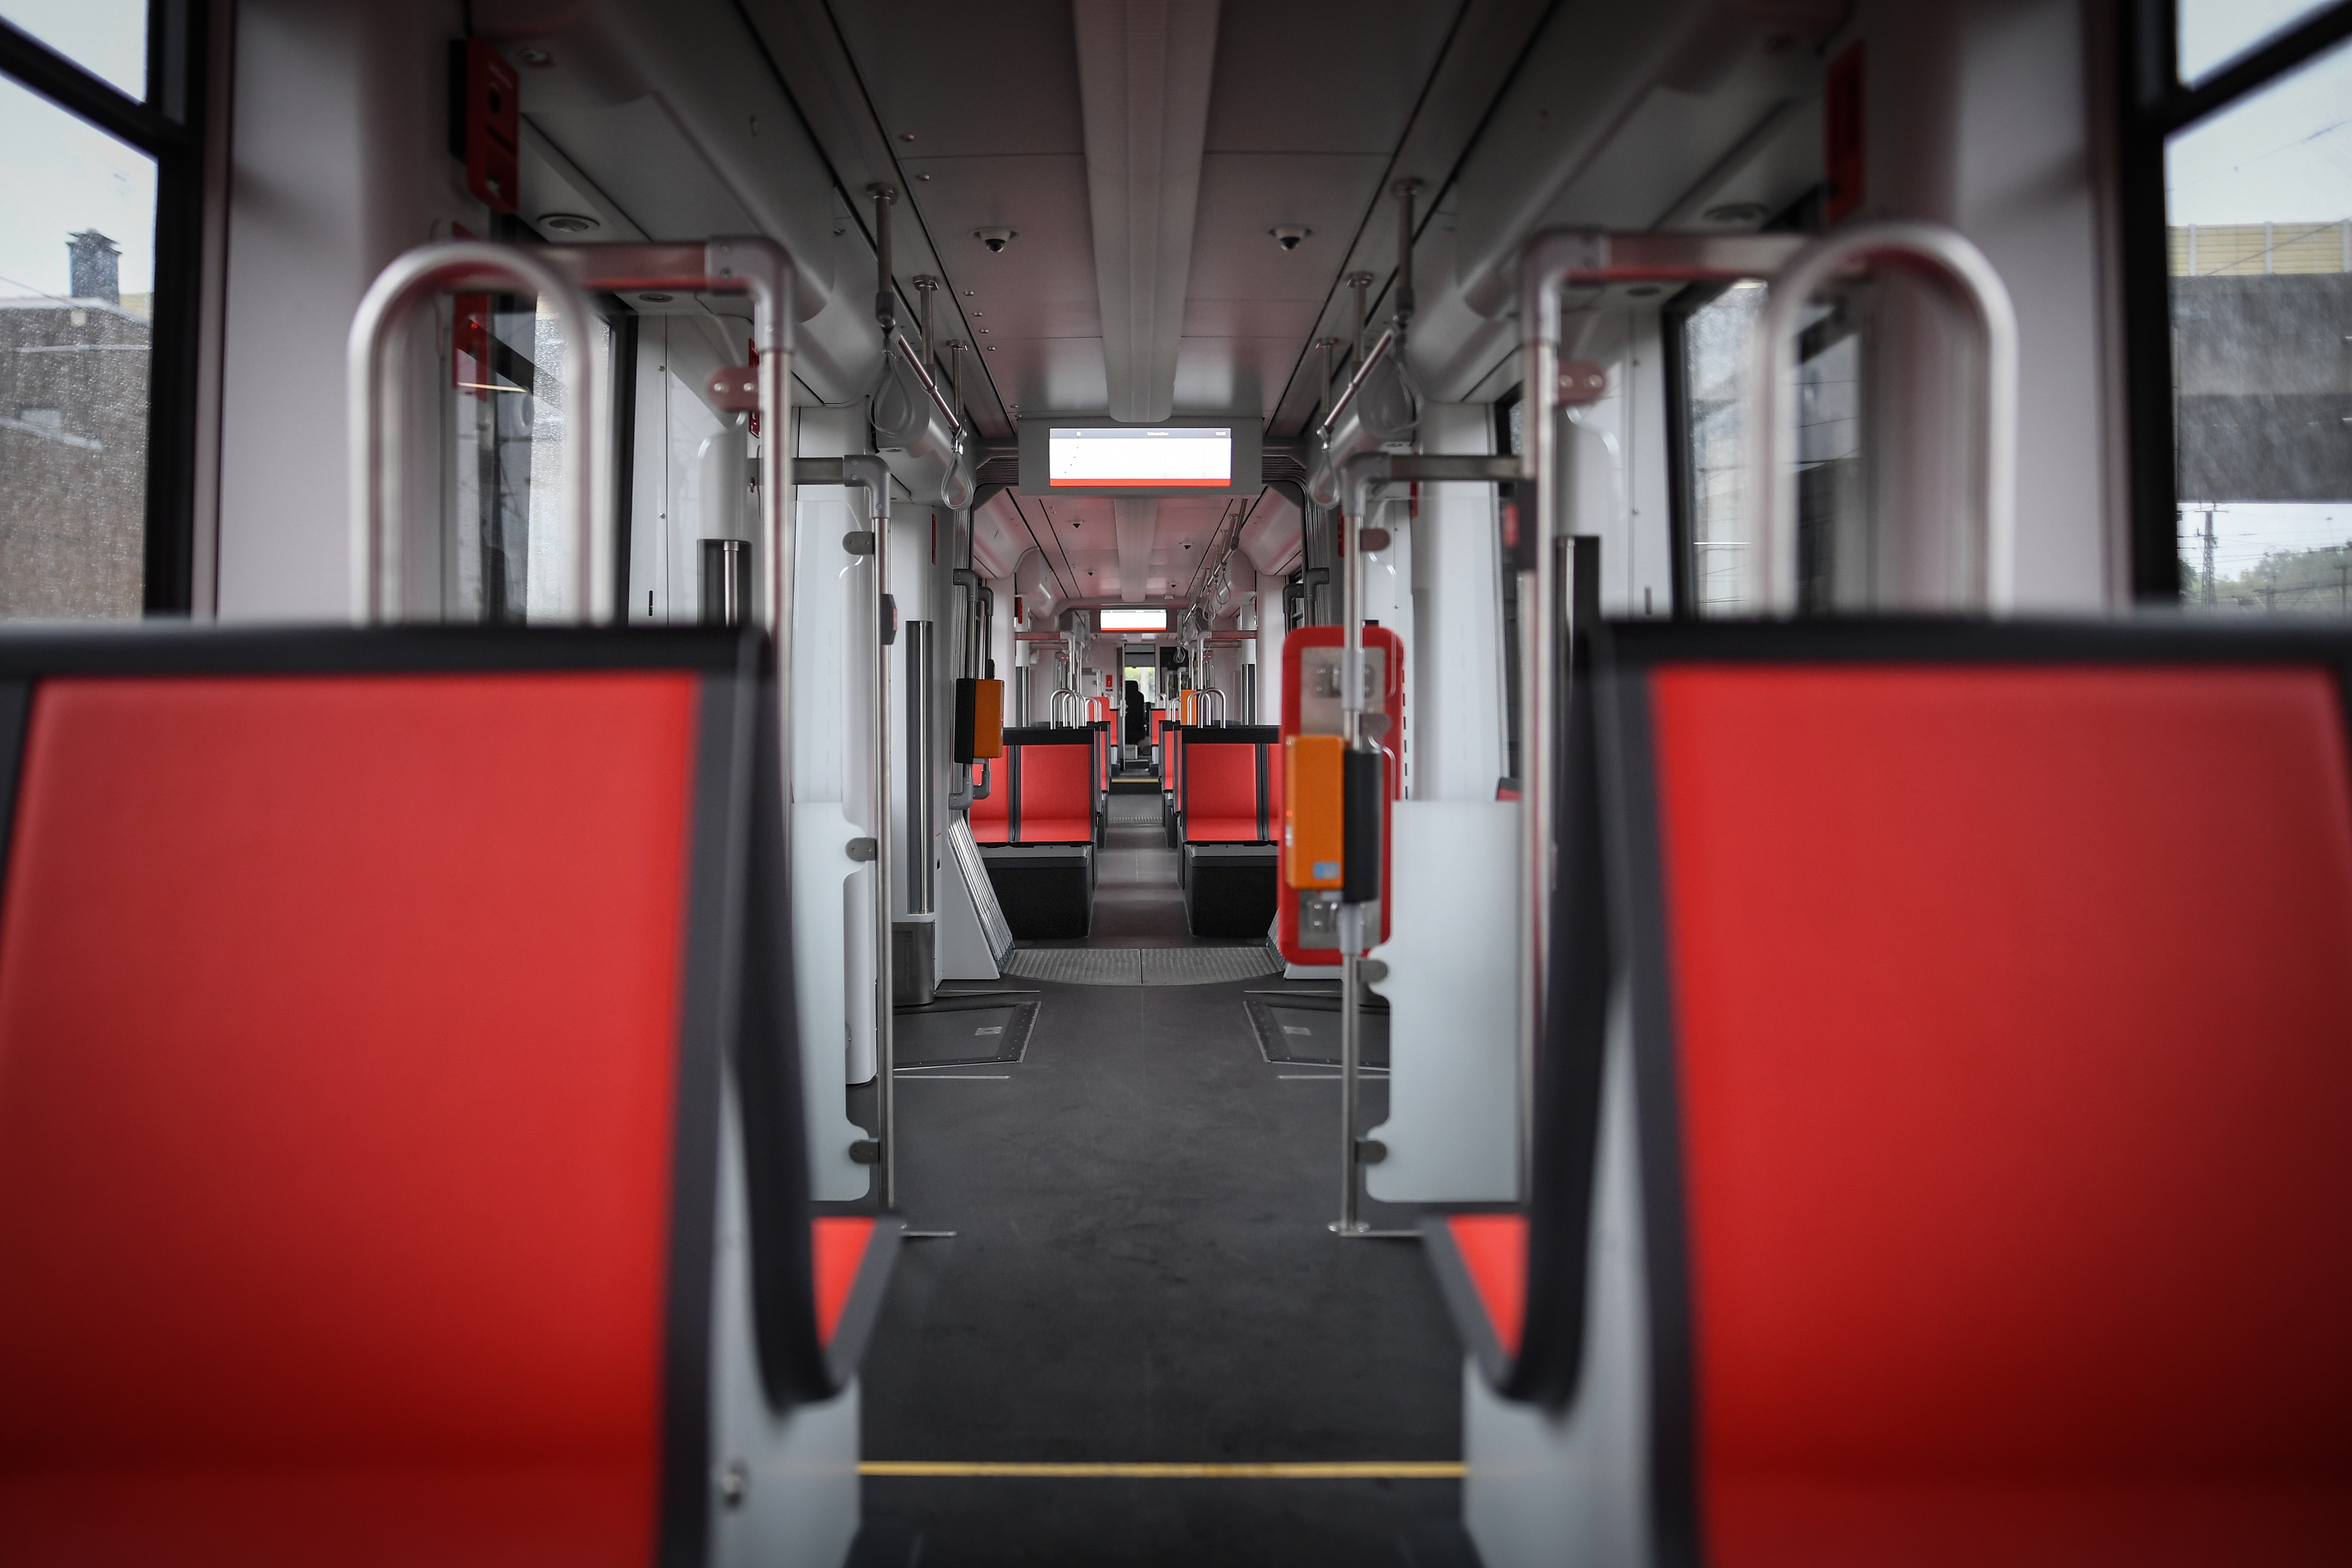 The new FLEXITY tram offers space for up to 200 passengers_Copyright_DVG